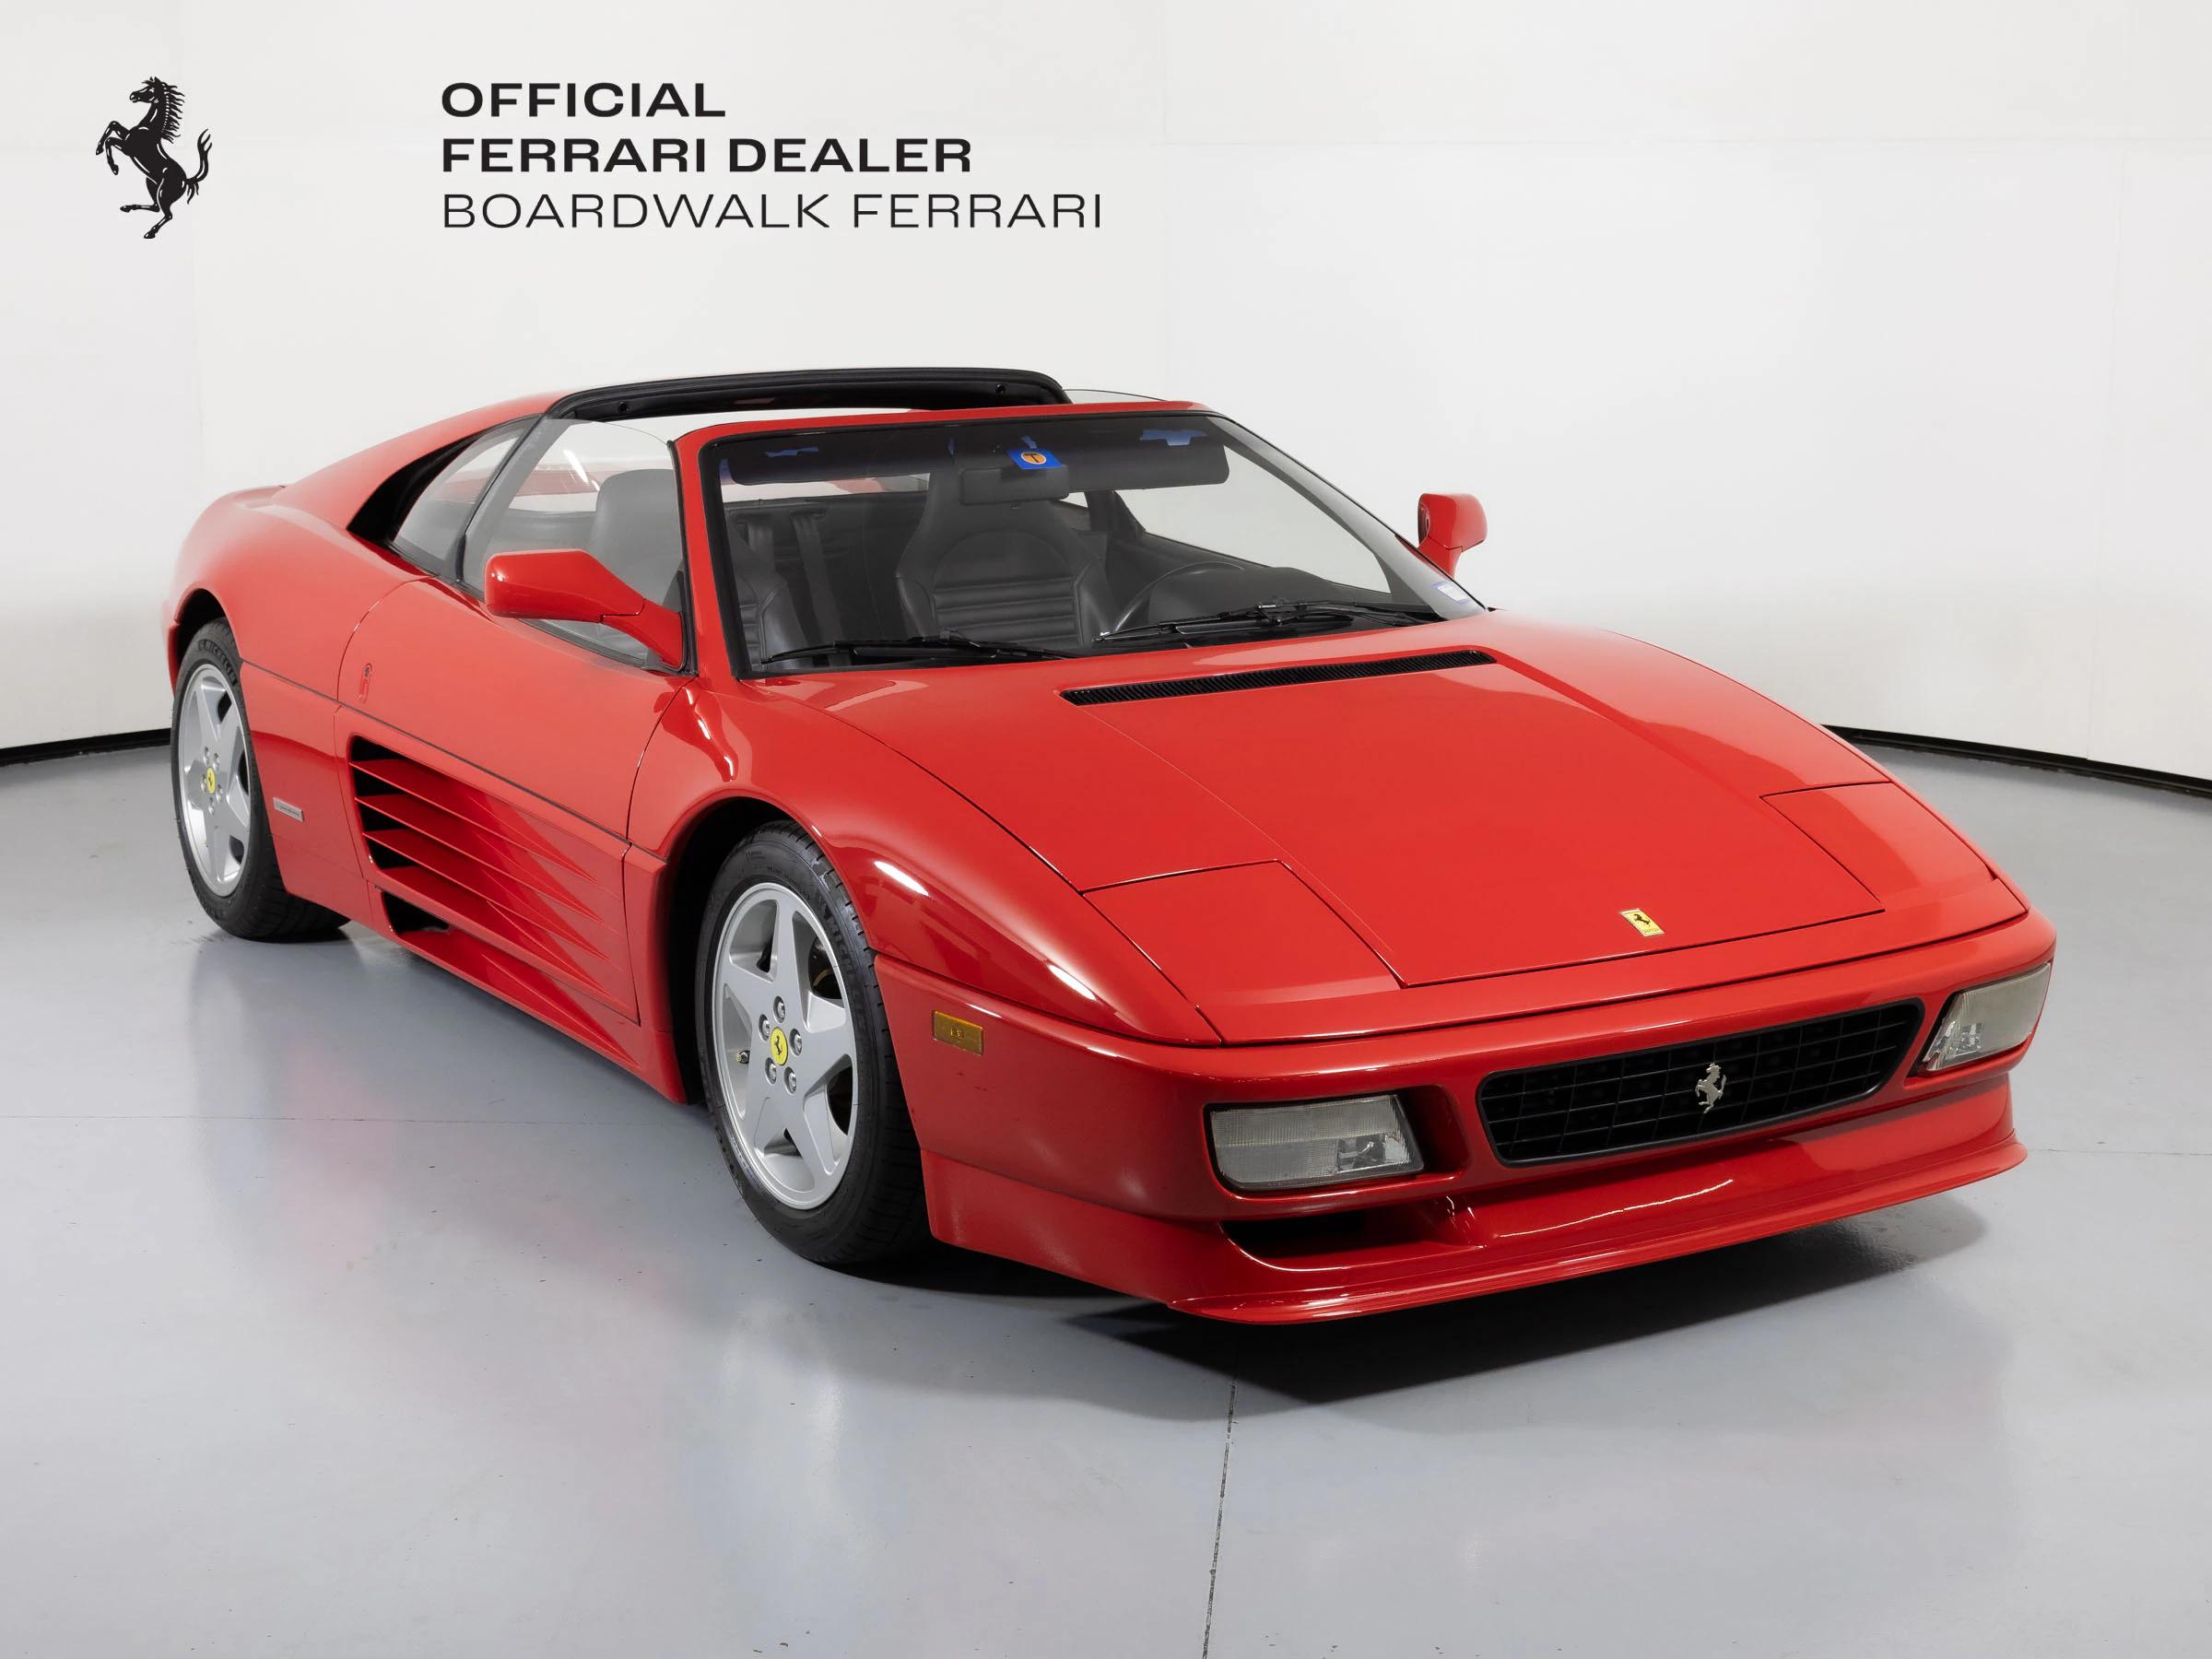 ferrari 348 for sale - How many 348 were made